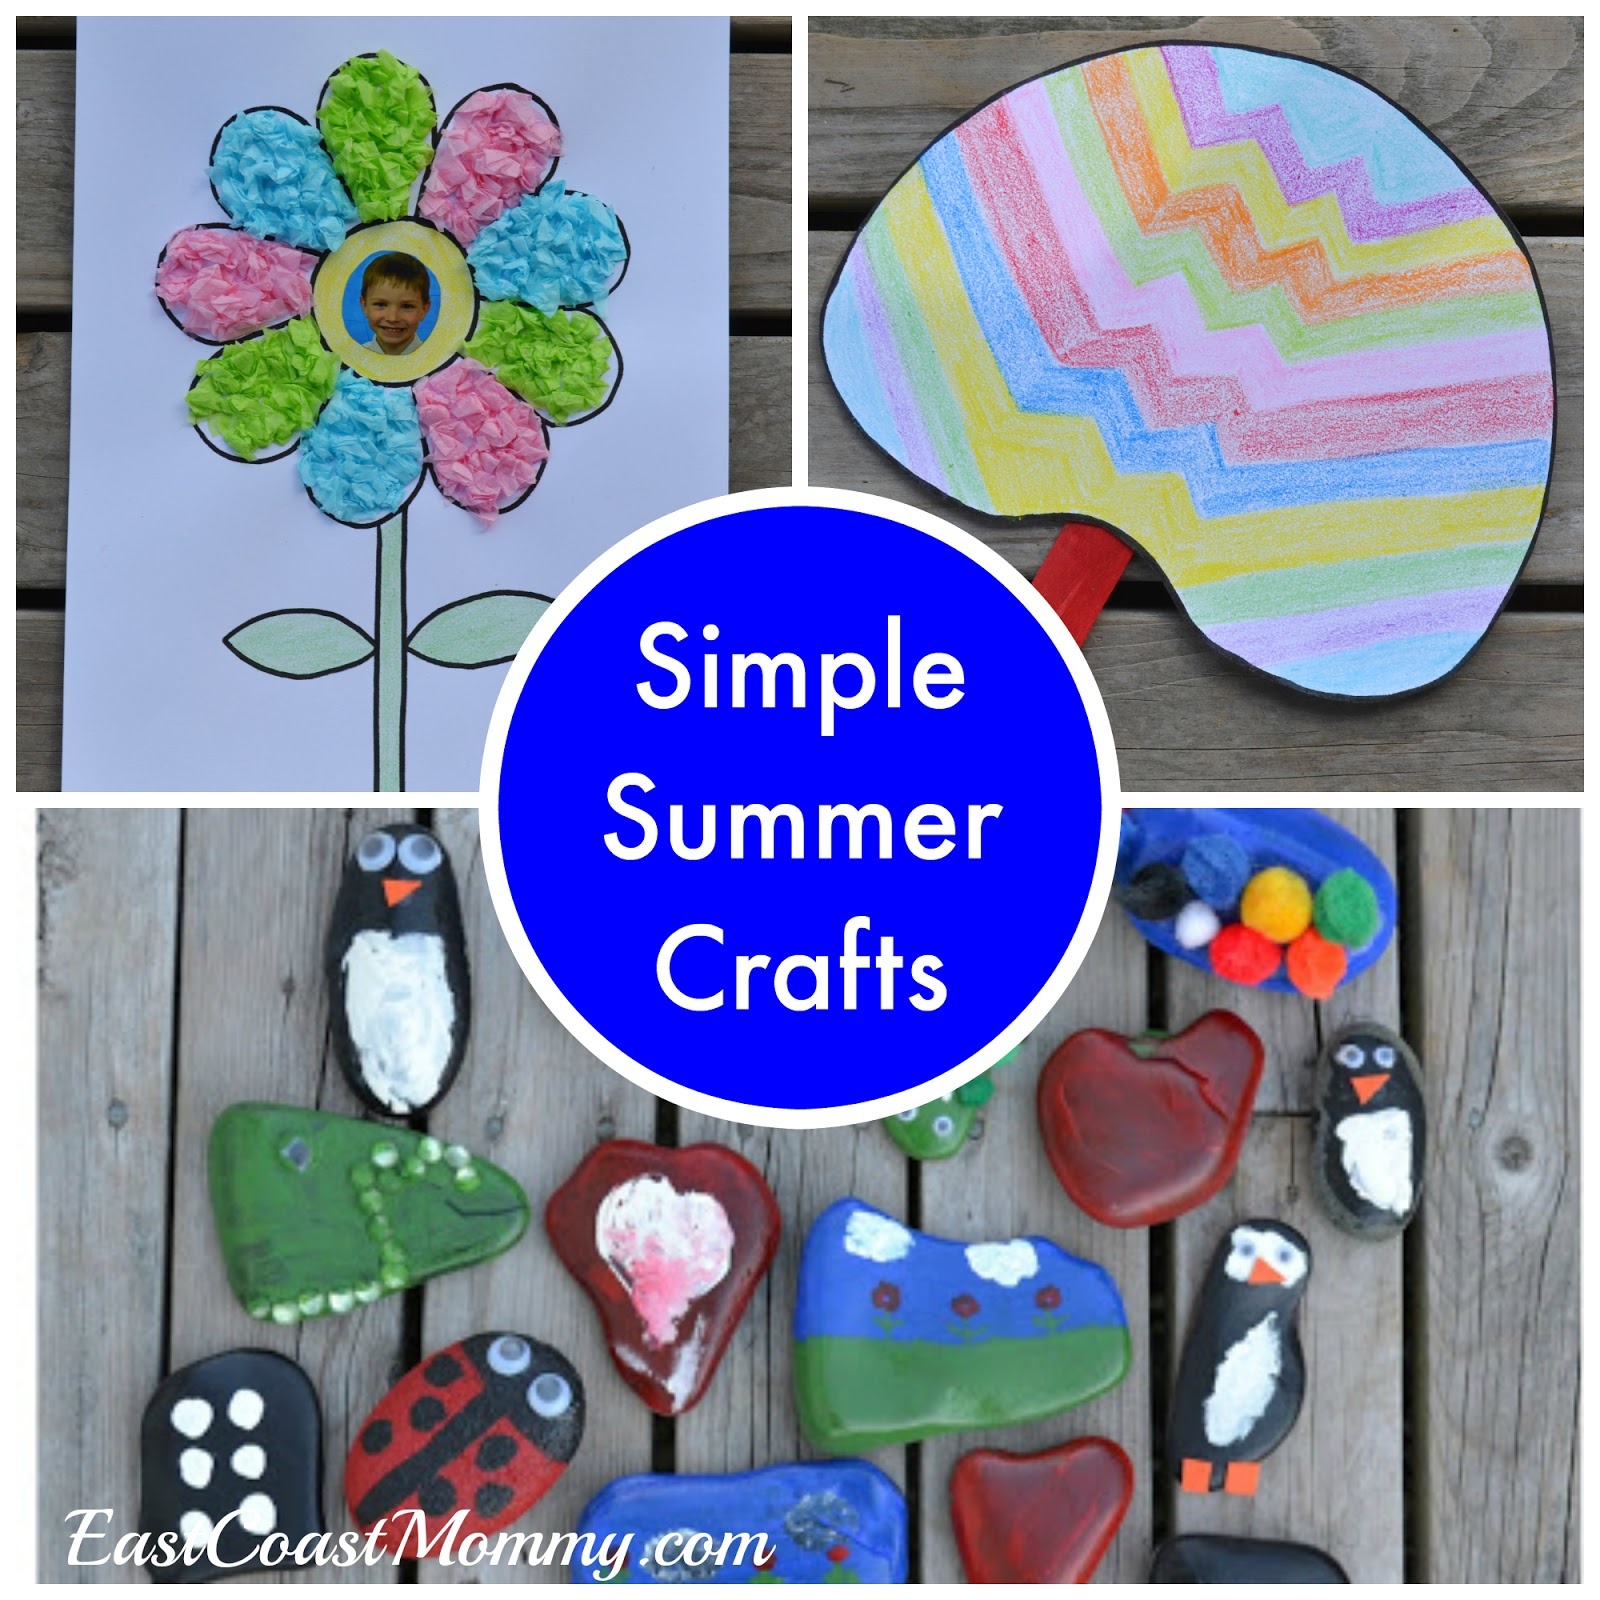 East Coast Mommy: Simple Summer Crafts {With Free Printable Templates} - Free Printable Craft Activities